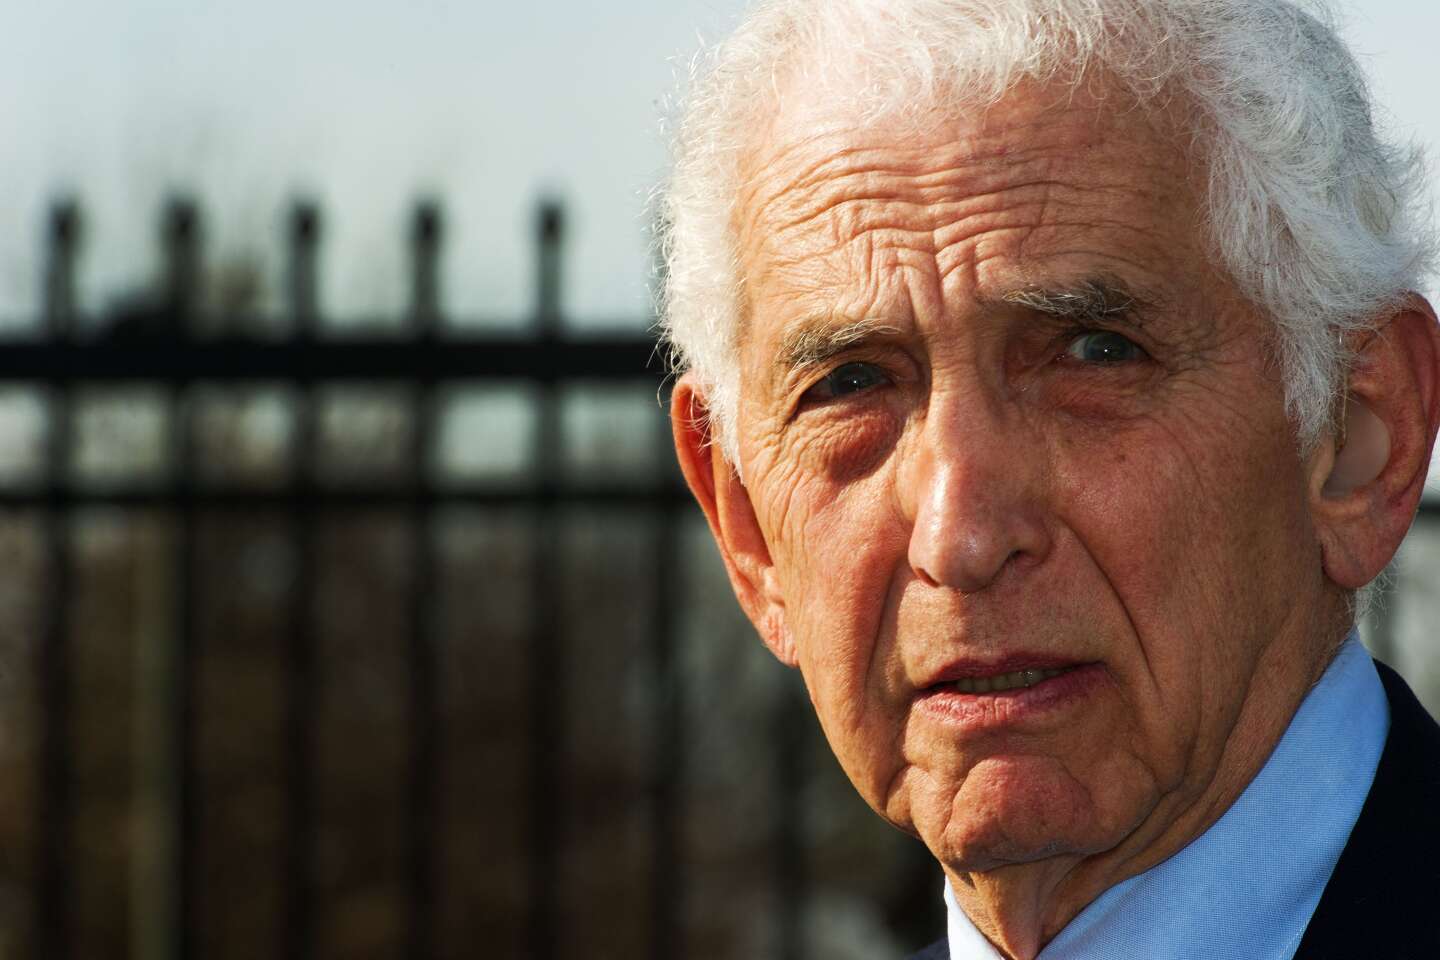 Death of Daniel Ellsberg, the whistleblower who exposed the “Pentagon Papers” to the world